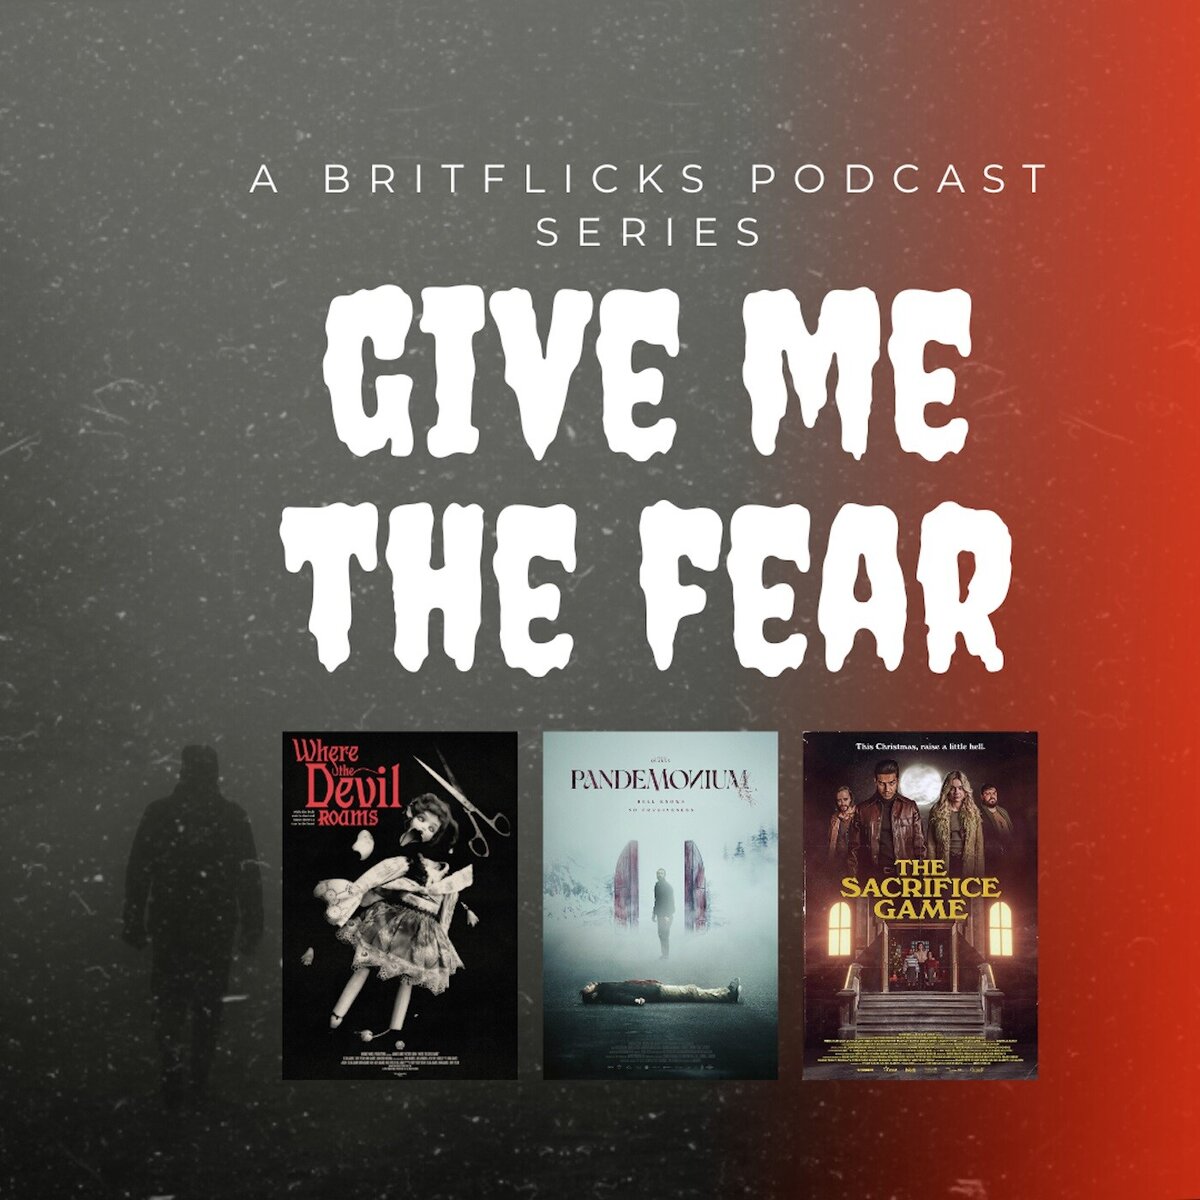 GIVE ME THE FEAR, Part 1 Frightfest 2023 Preview Podcast Featuring WHERE THE DEVIL ROAMS, PANDEMONIUM, and THE SACRIFICE GAME